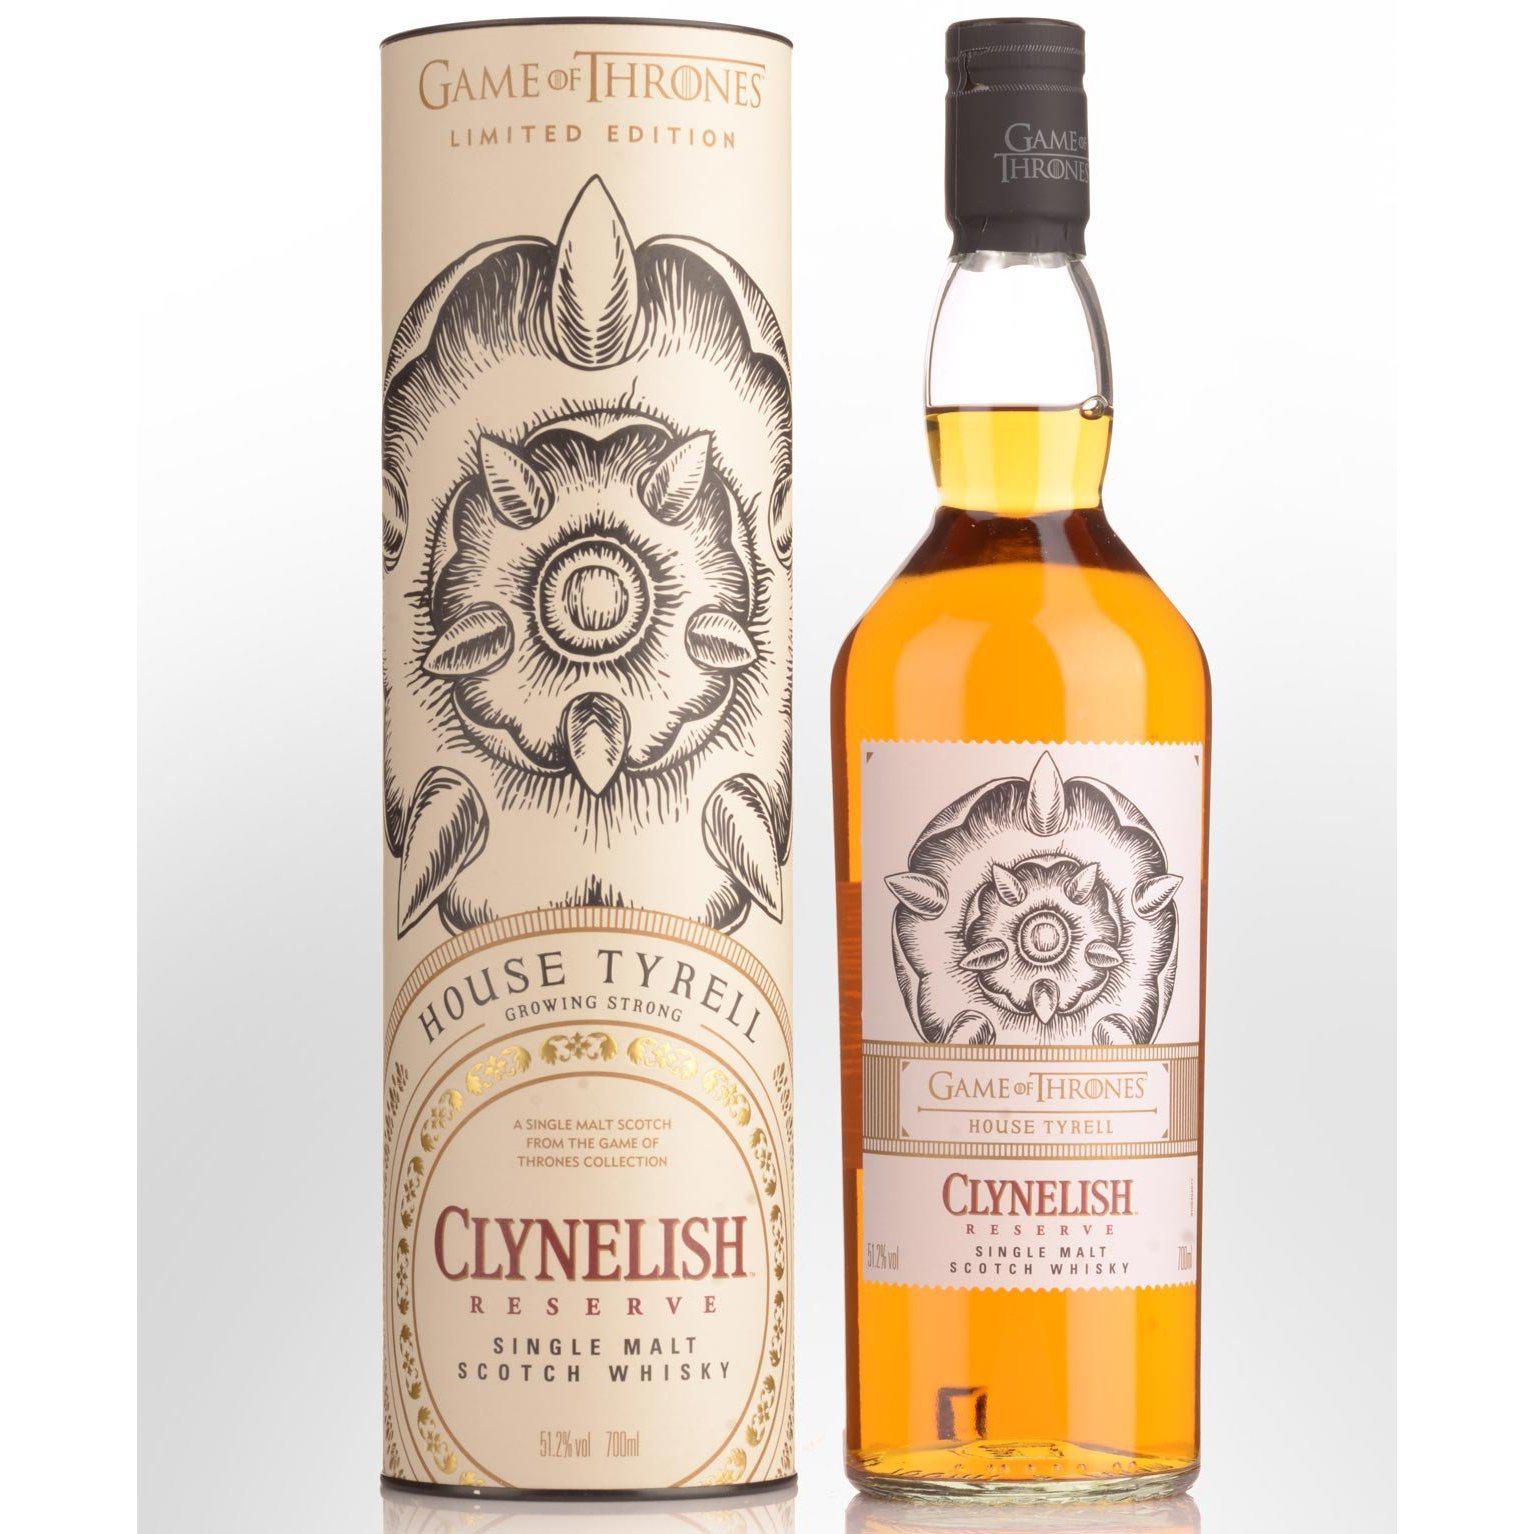 Clynelish Game of Thrones House Tyrell Limited Edition Cask Strength Single Malt Scotch Whisky 700ml